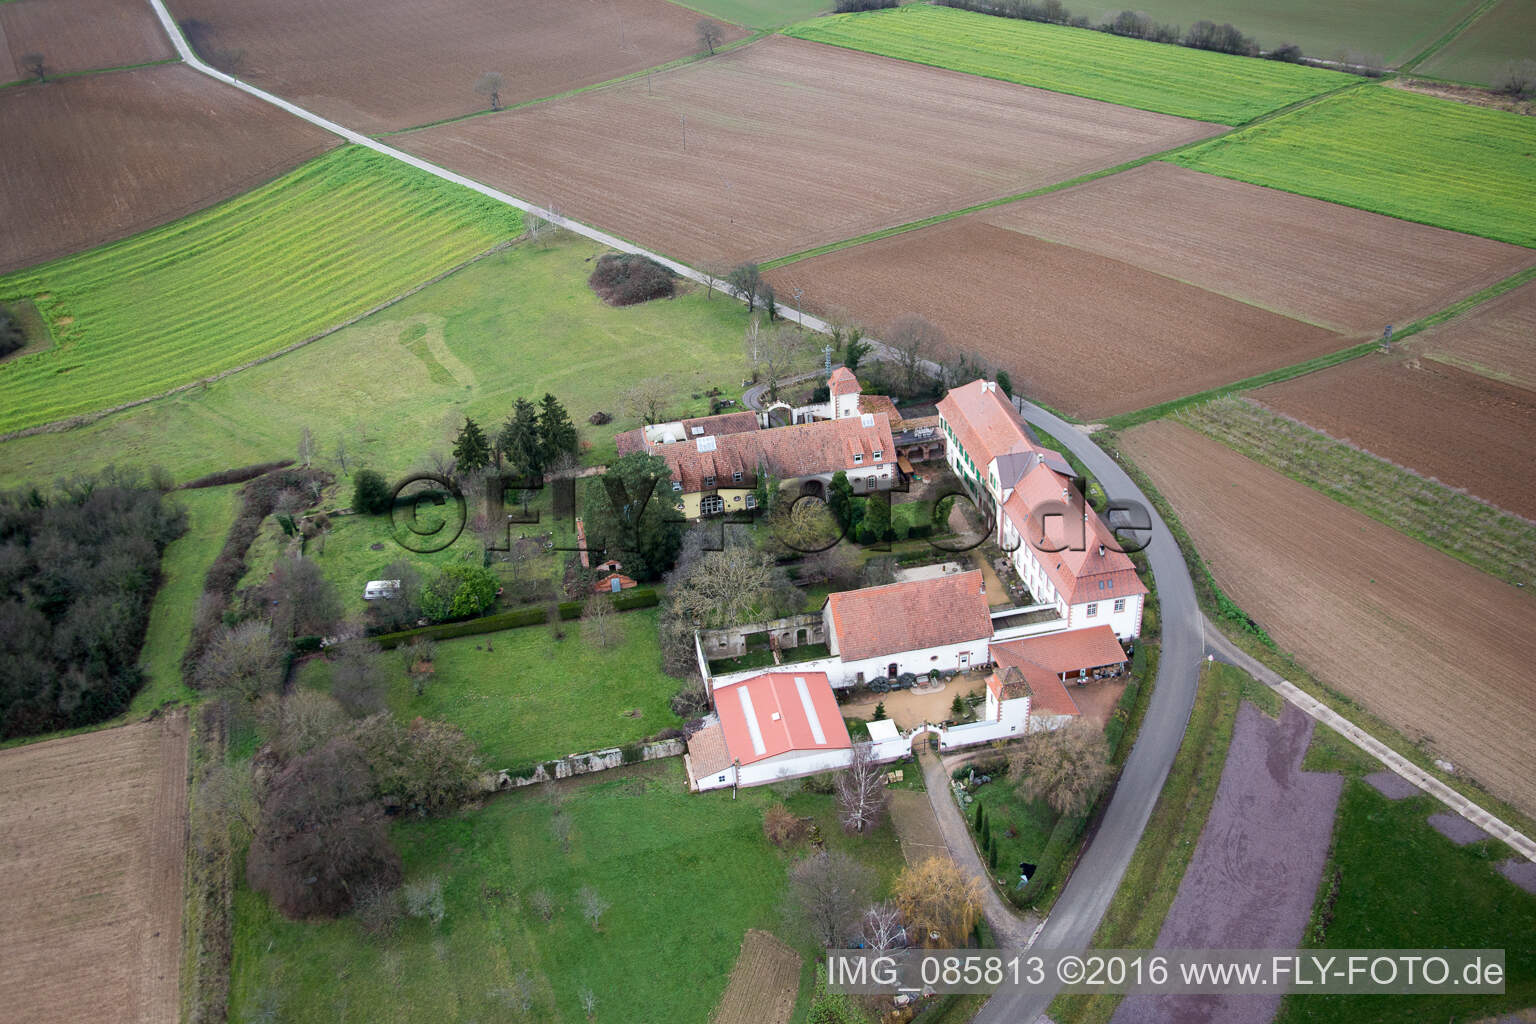 Drone recording of Workshop for Assisted Living of hidden Talents GmbH in the district Haftelhof in Schweighofen in the state Rhineland-Palatinate, Germany